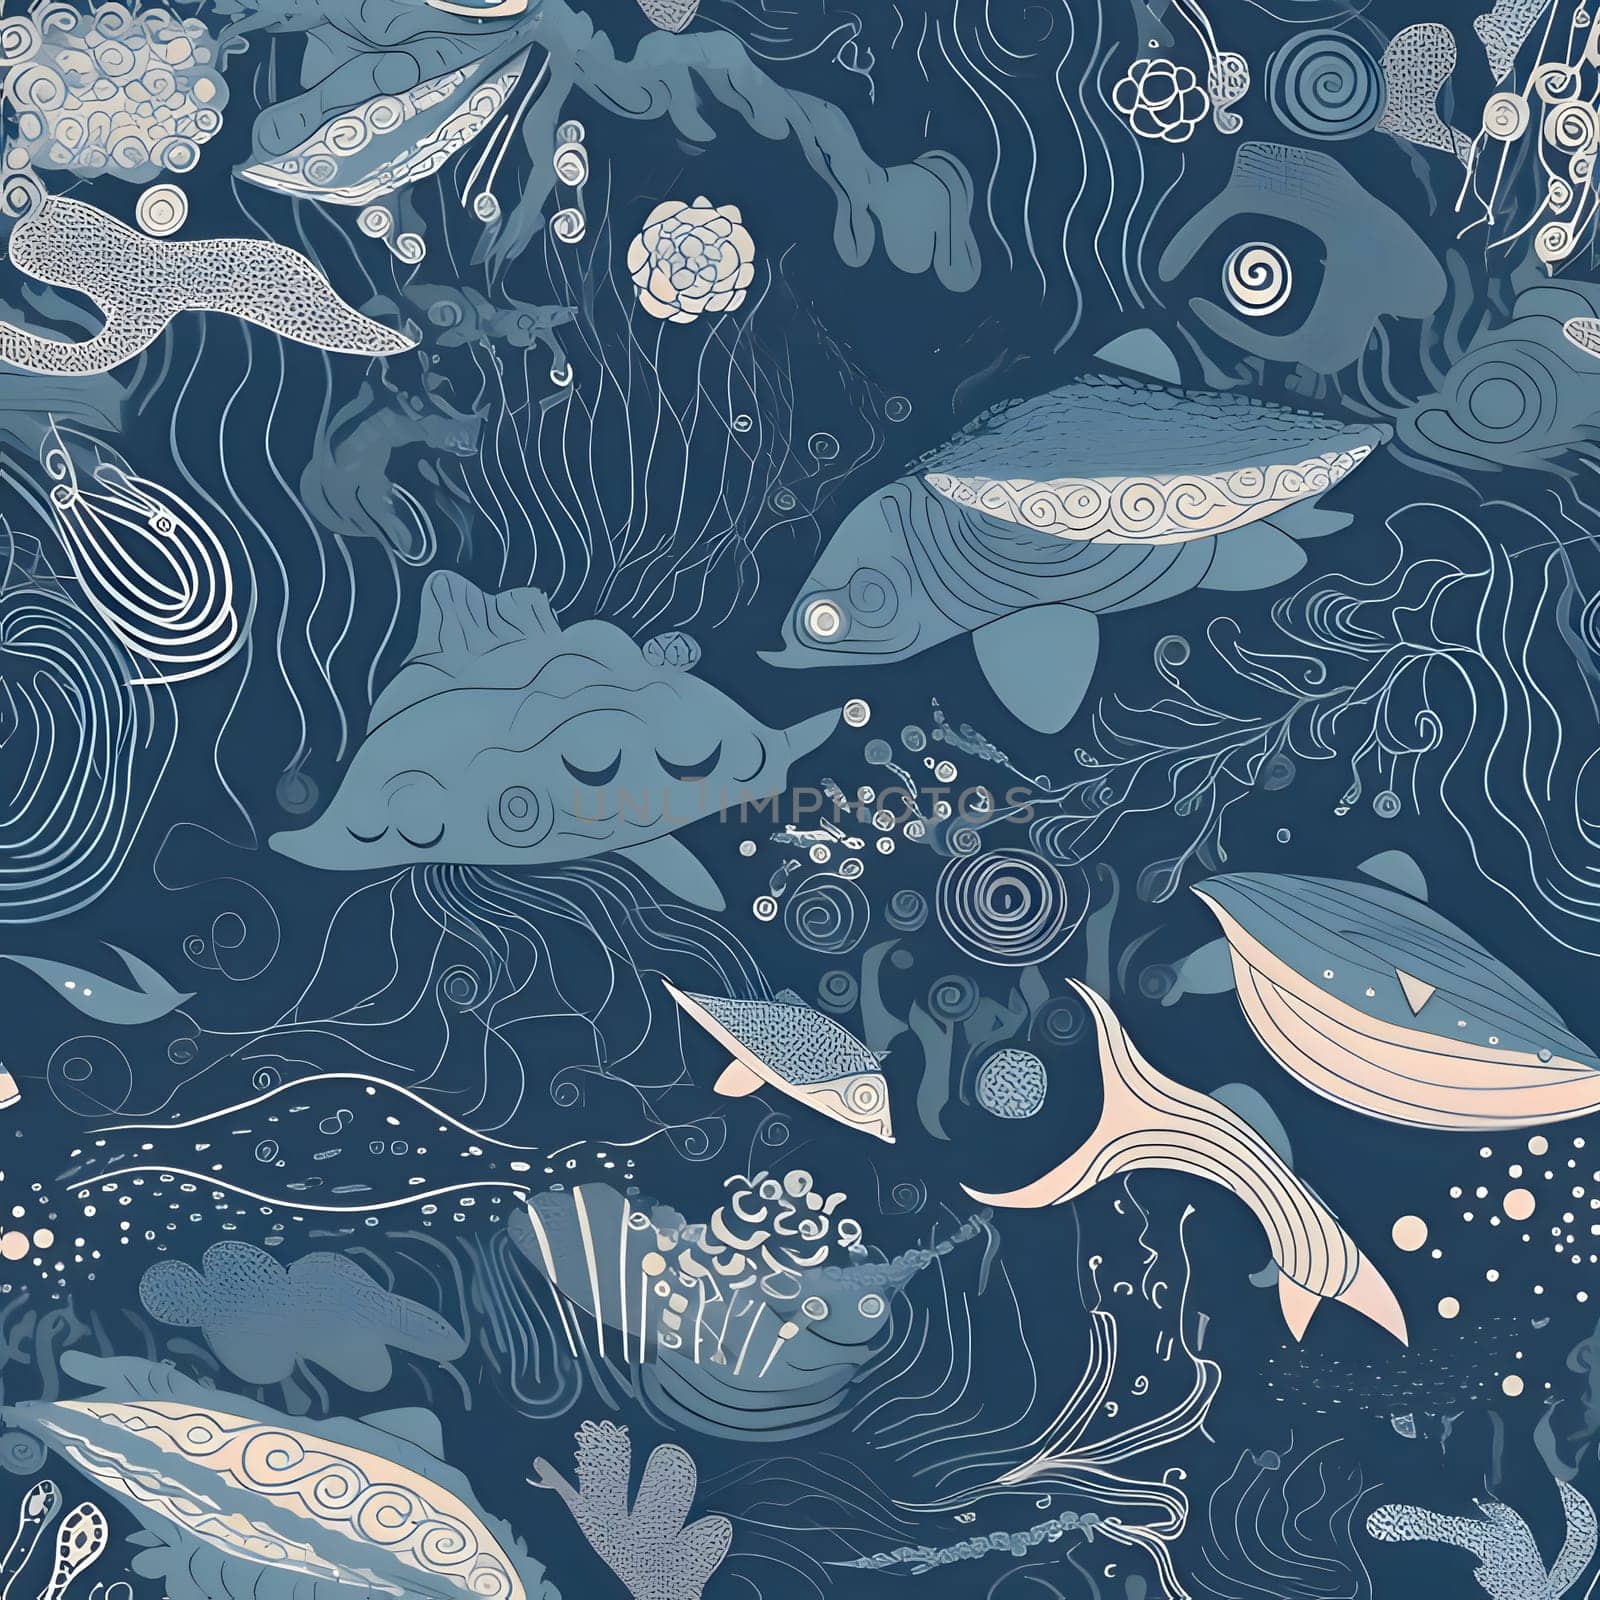 Patterns and banners backgrounds: Seamless pattern with fish and seaweed. Vector illustration.